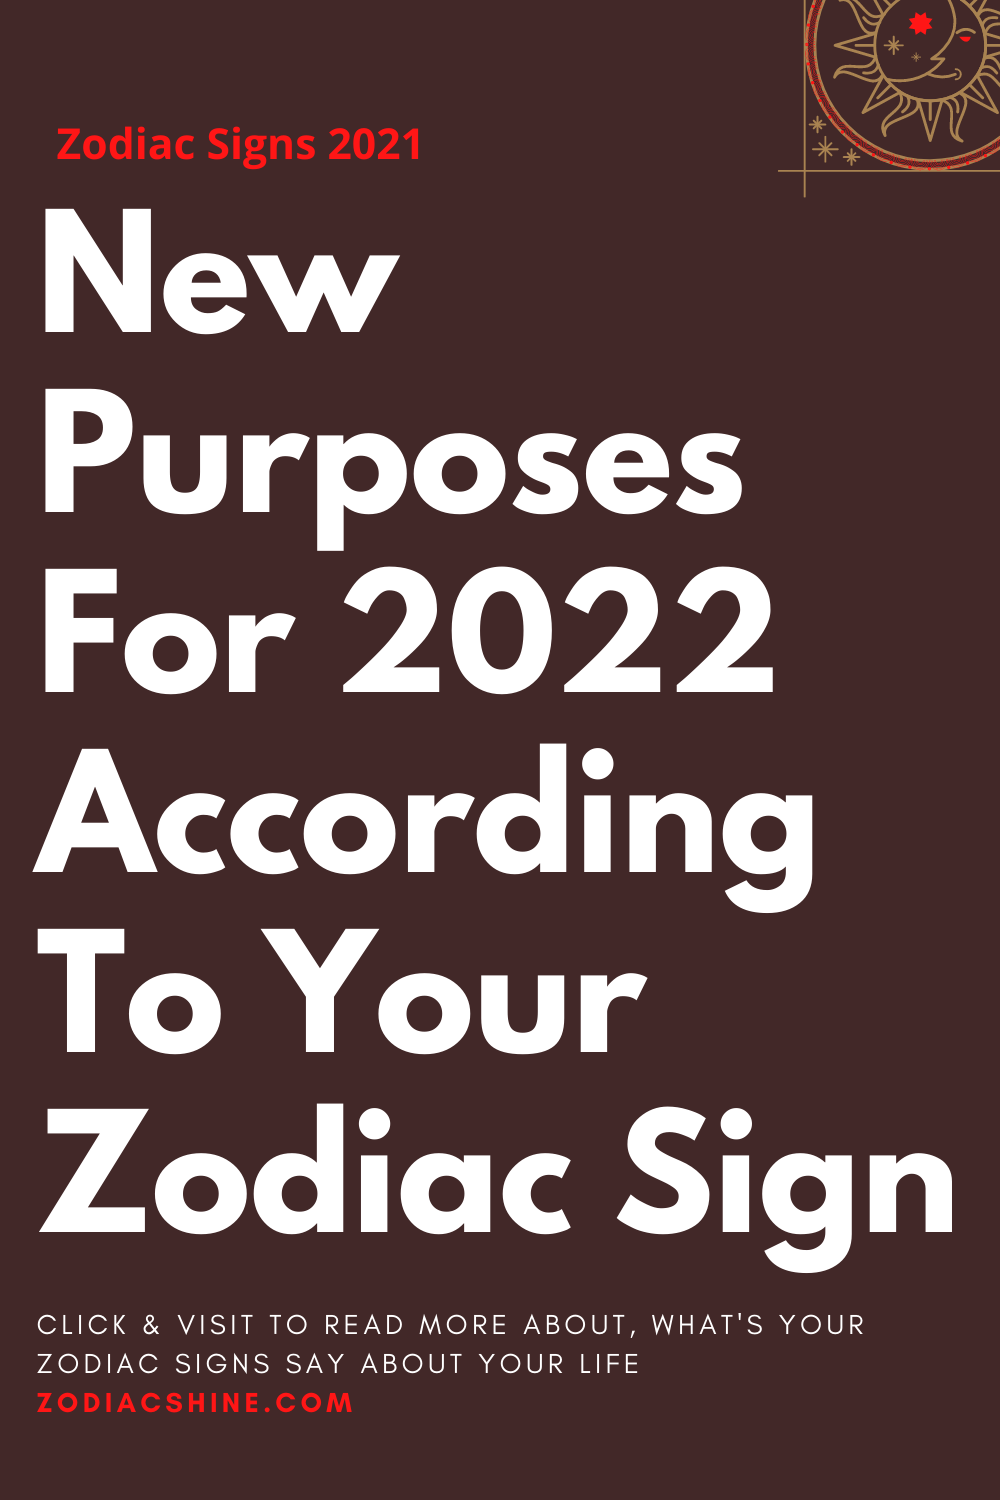 New Purposes For 2022 According To Your Zodiac Sign